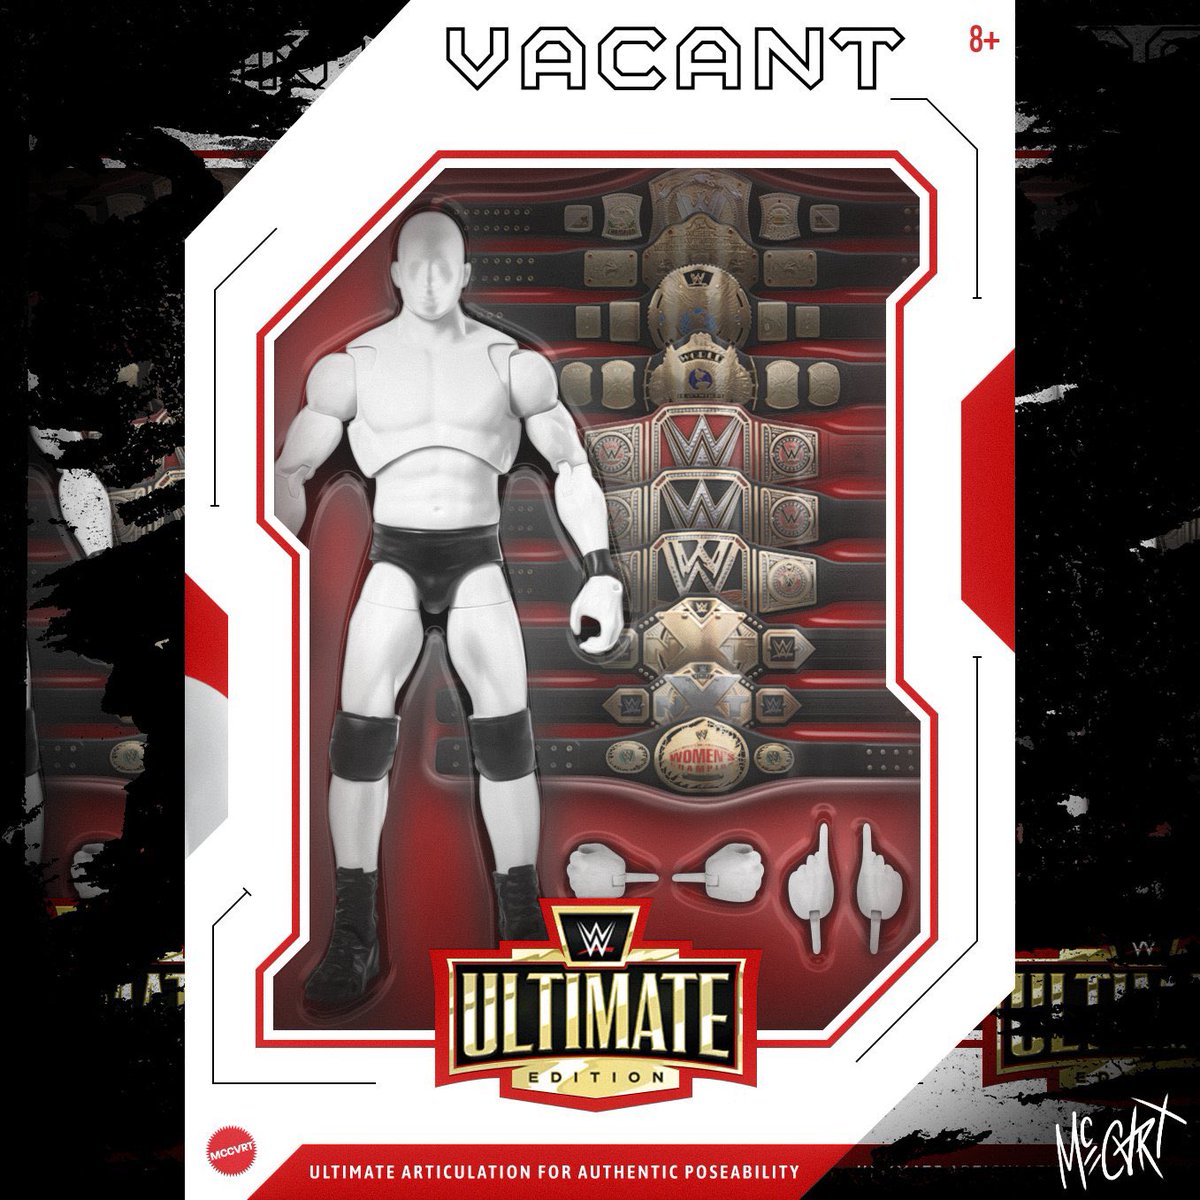 I want/need to bring this to the shelves. @WWEVacant #wwe #mattel #ultimateedition